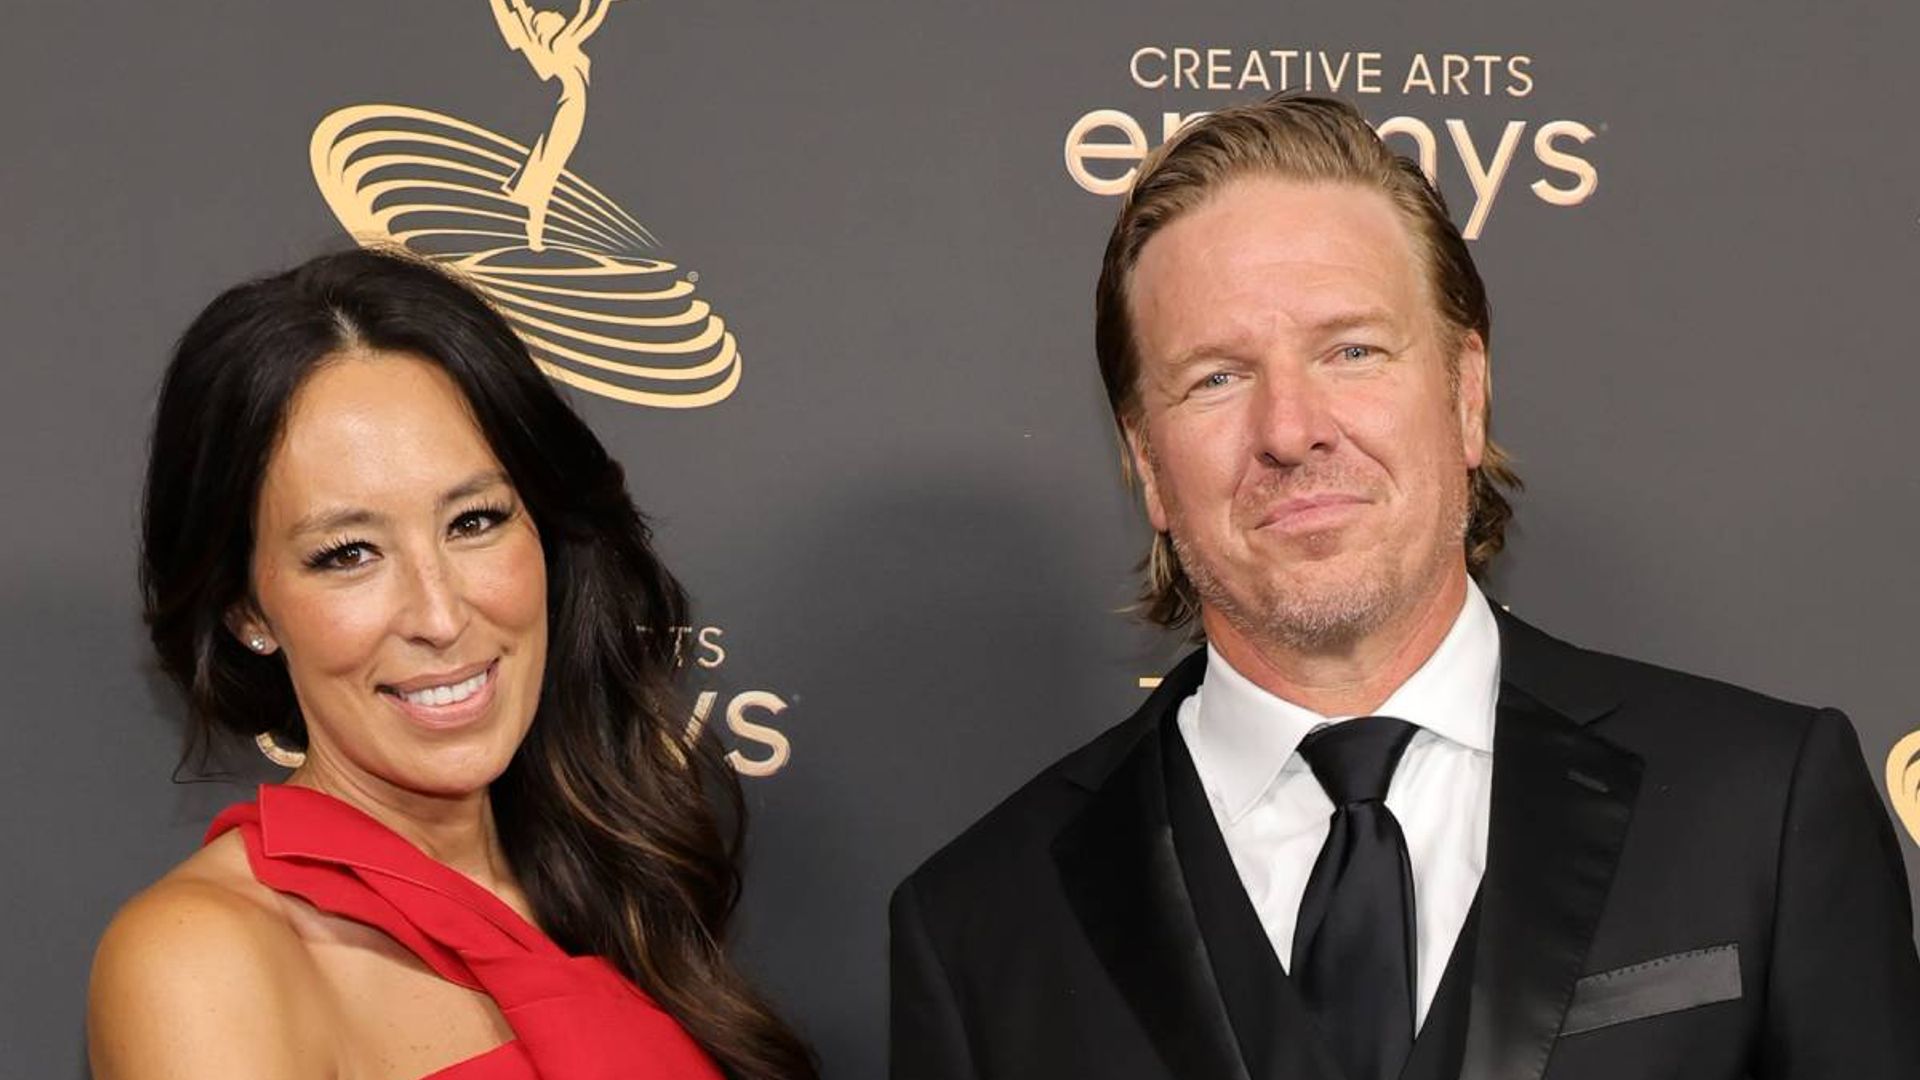 Joanna Gaines shares sentimental photo with rarely-seen sisters and mom as they discuss their upbringing